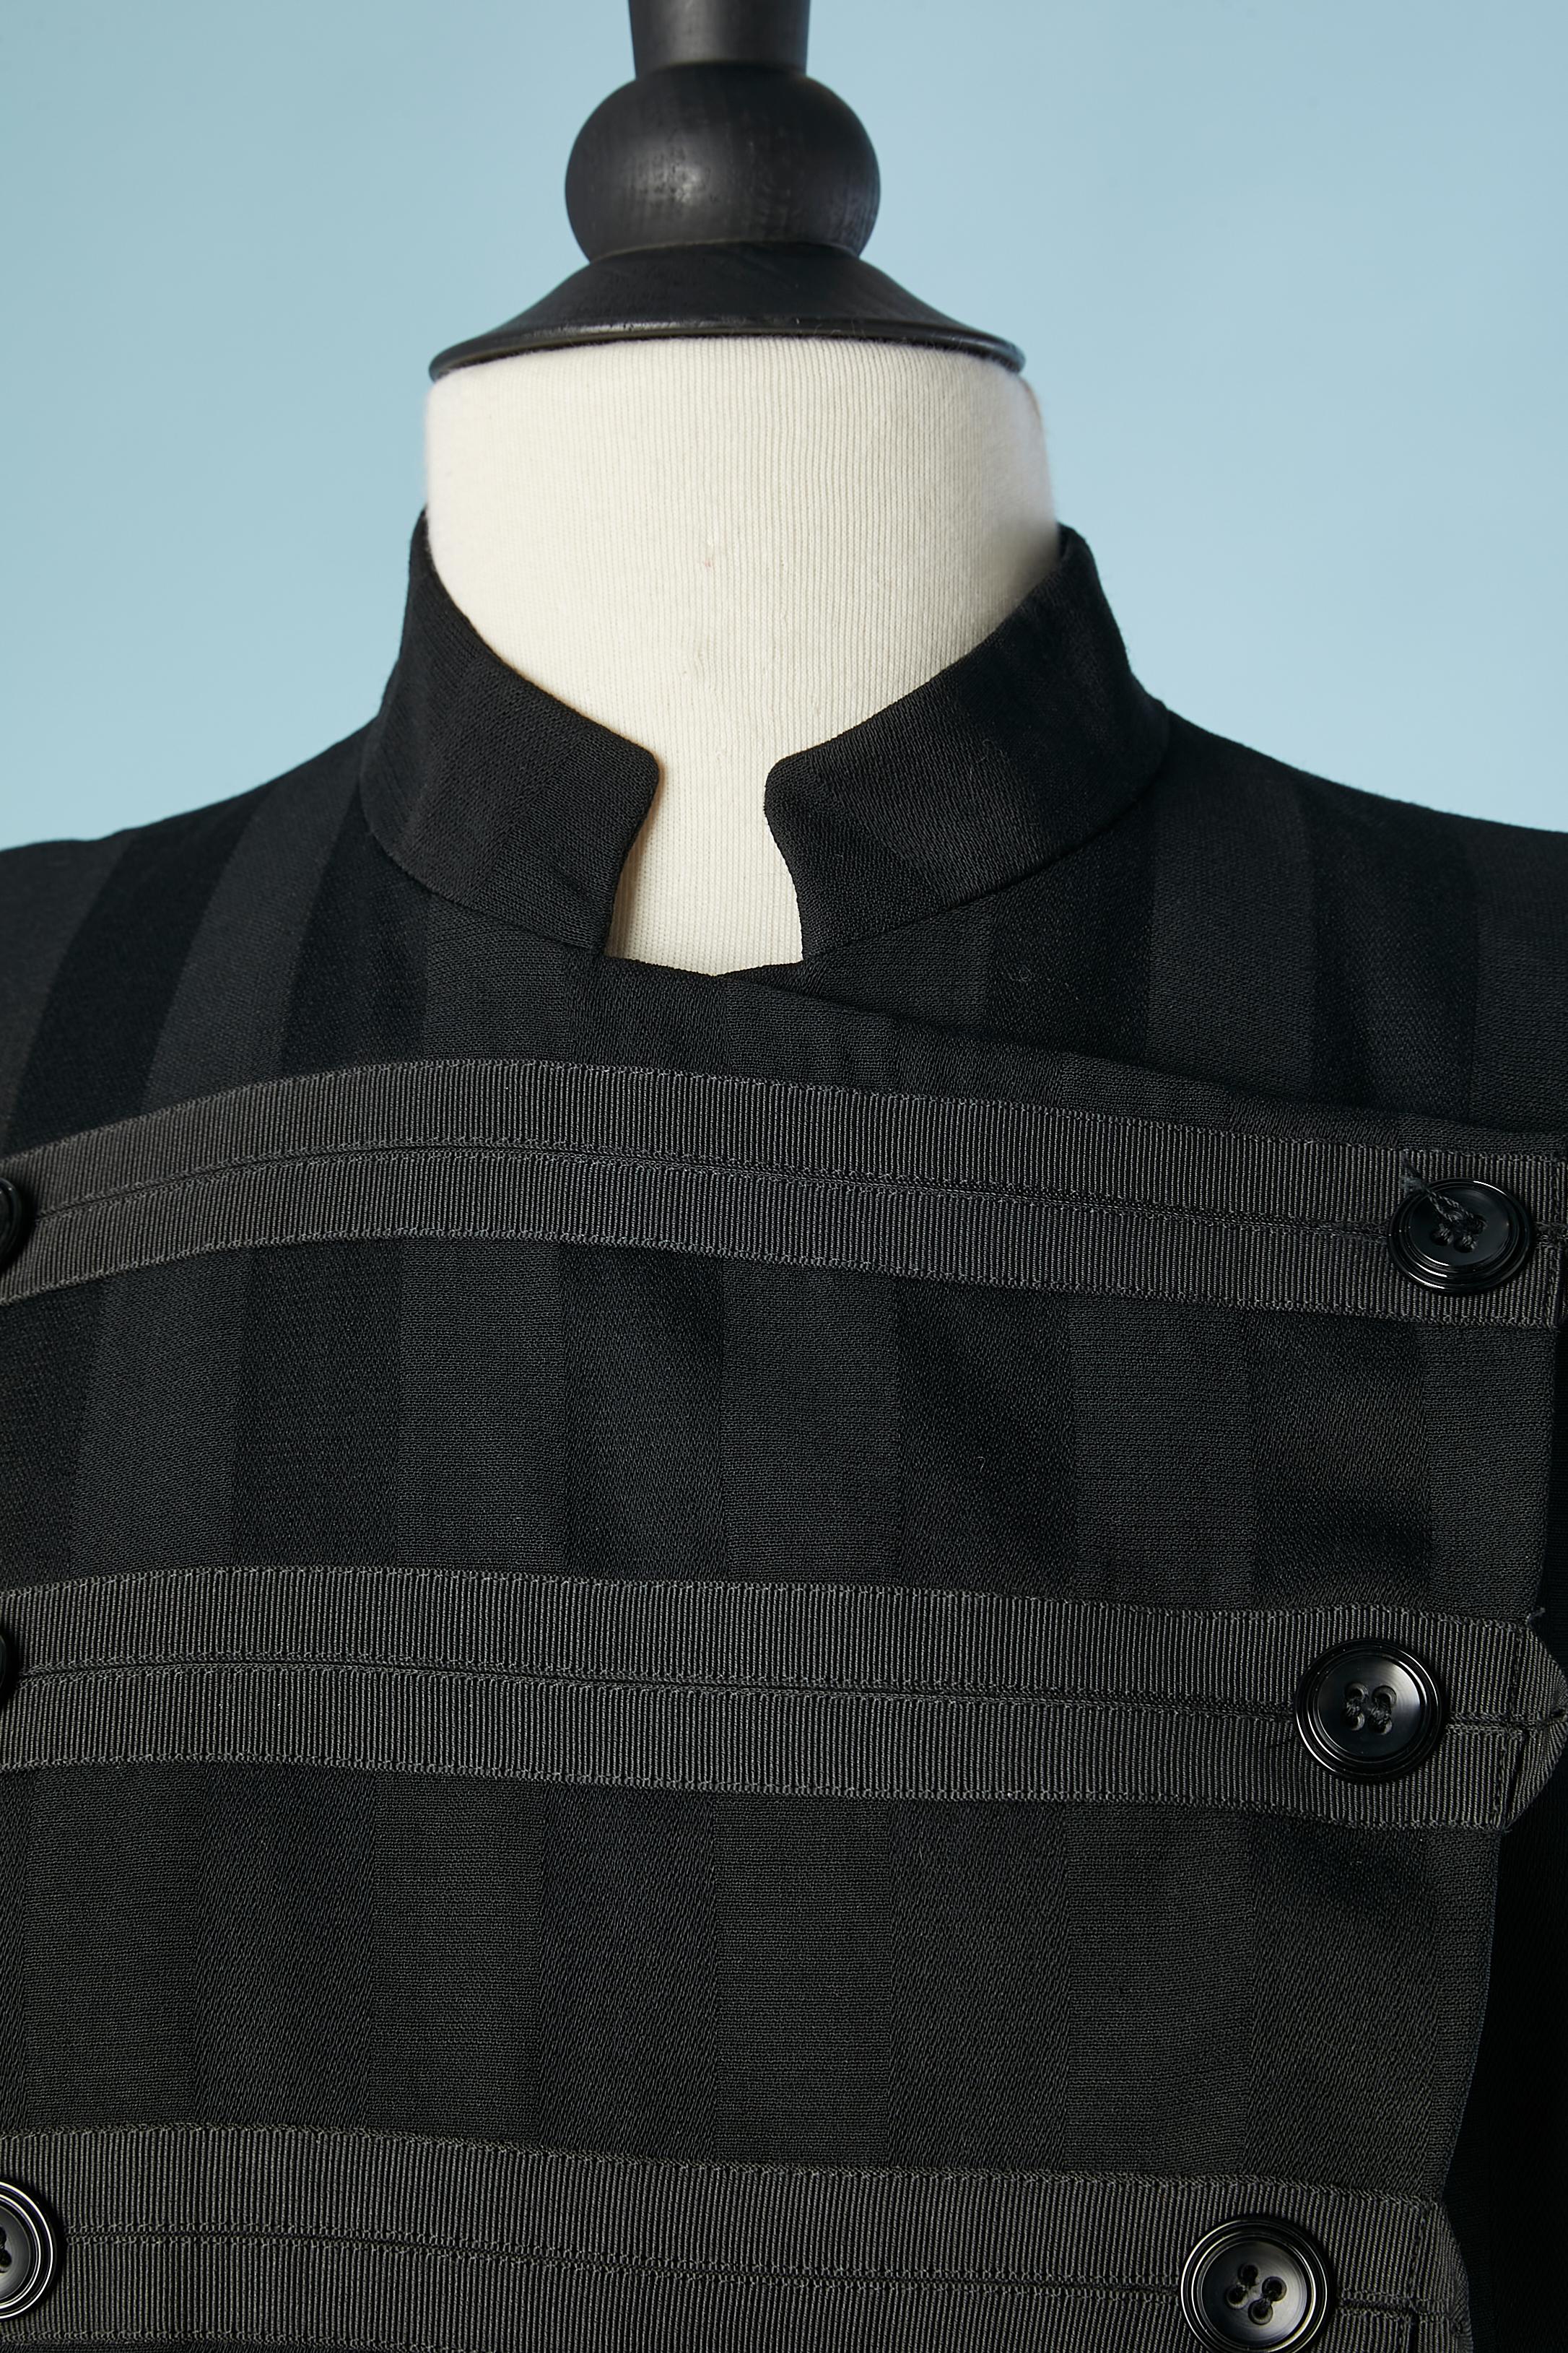 Black striped officier double-breasted wool jacket. Lining composition: acetate. Trimming: cotton
Shoulder-pad. 
SIZE M 